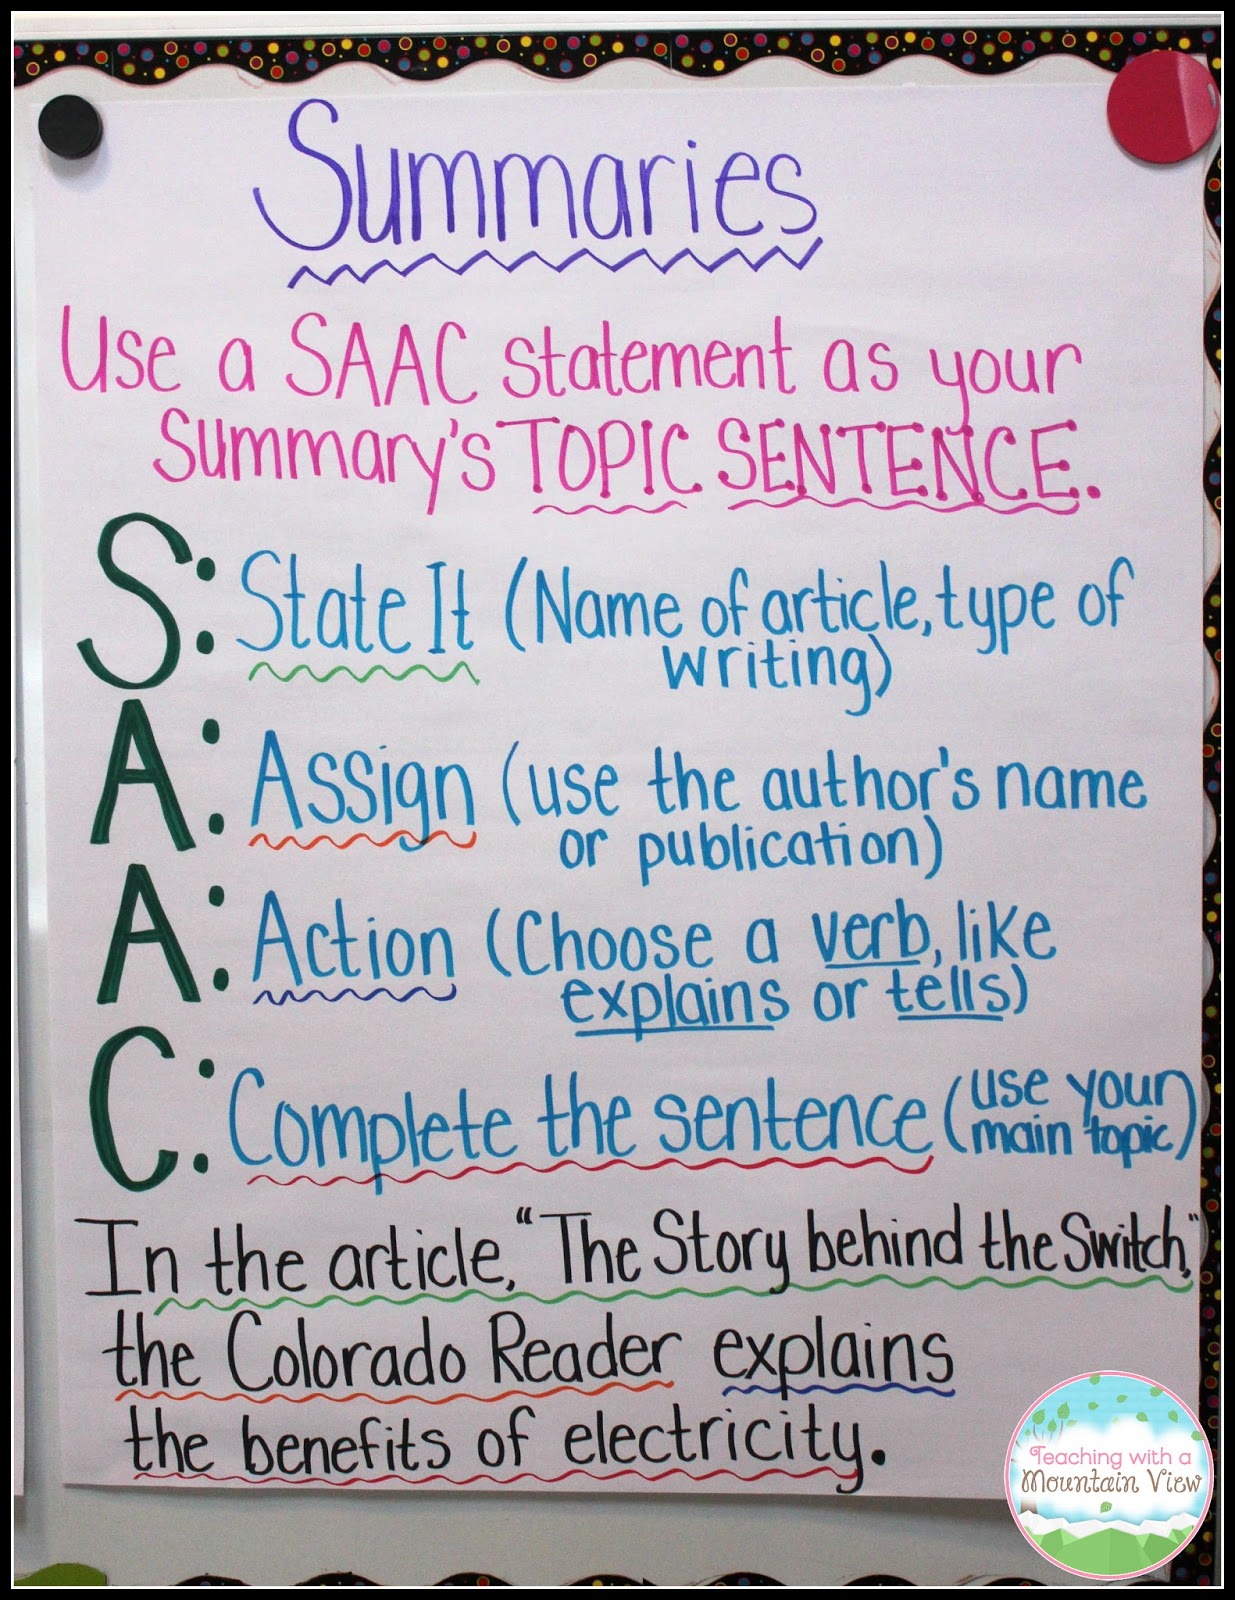 How to Summarize an Essay or Article